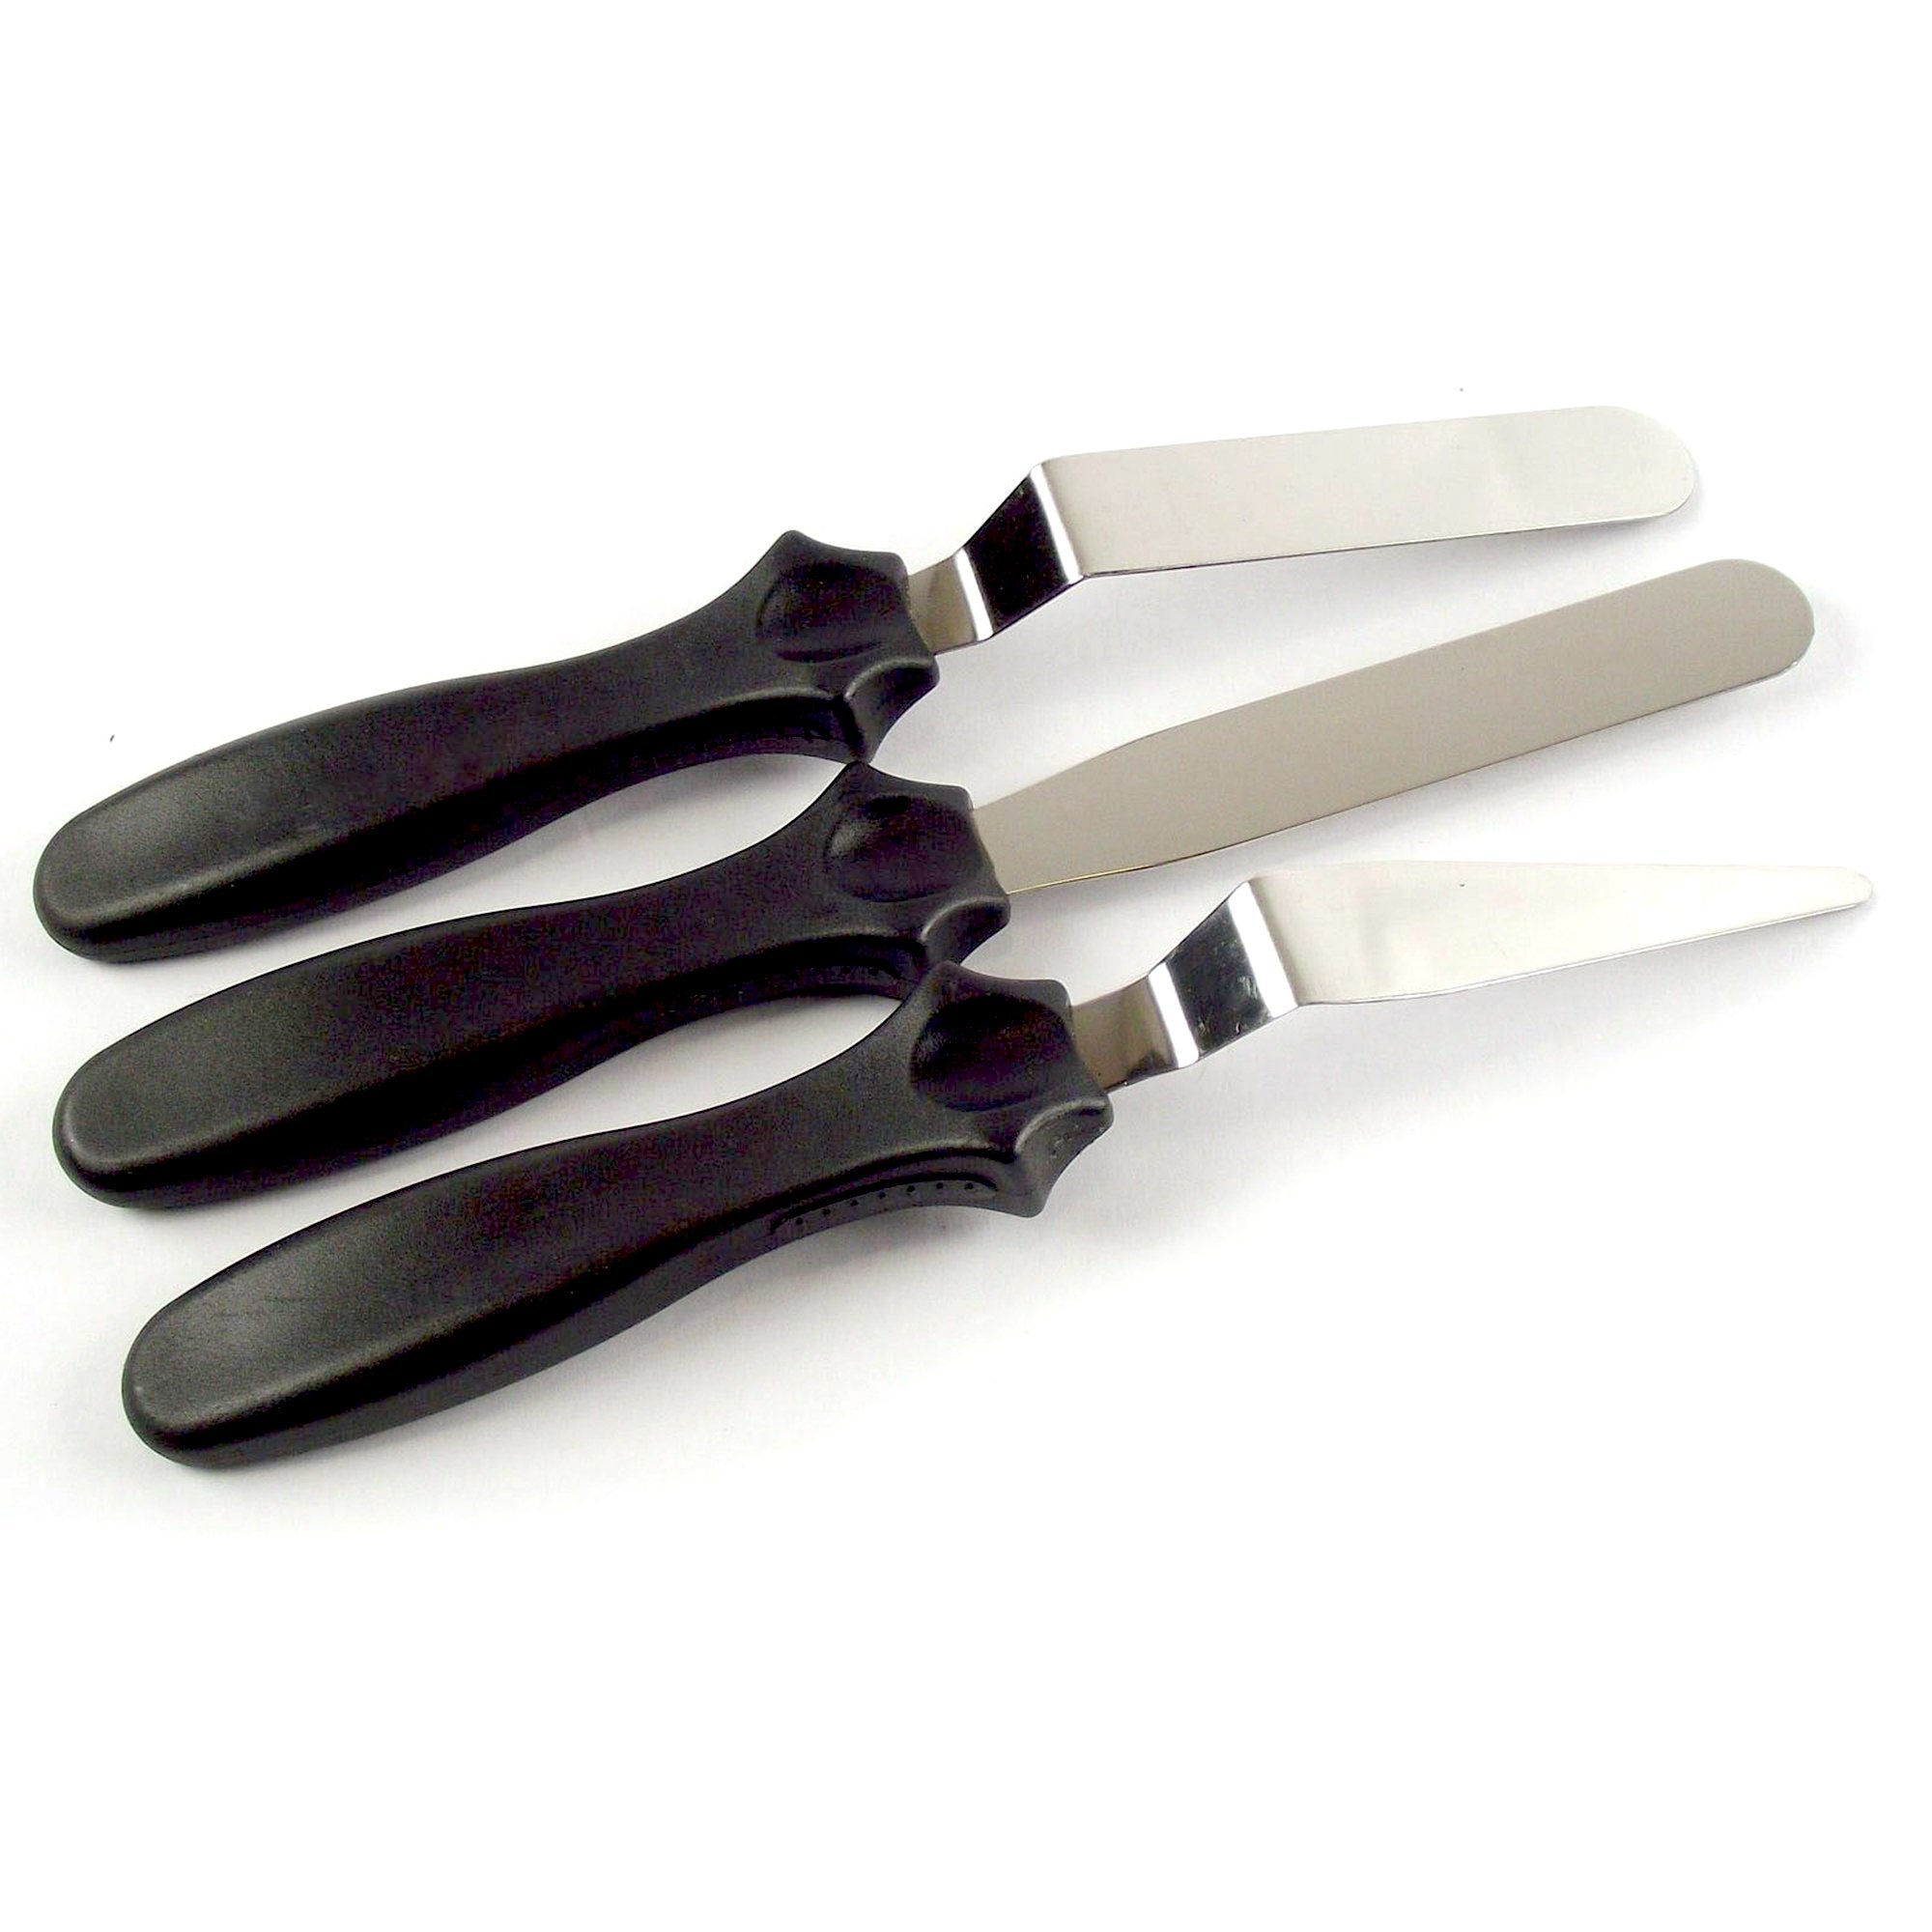 1126 multi function cake icing spatula knife set of 3 pieces